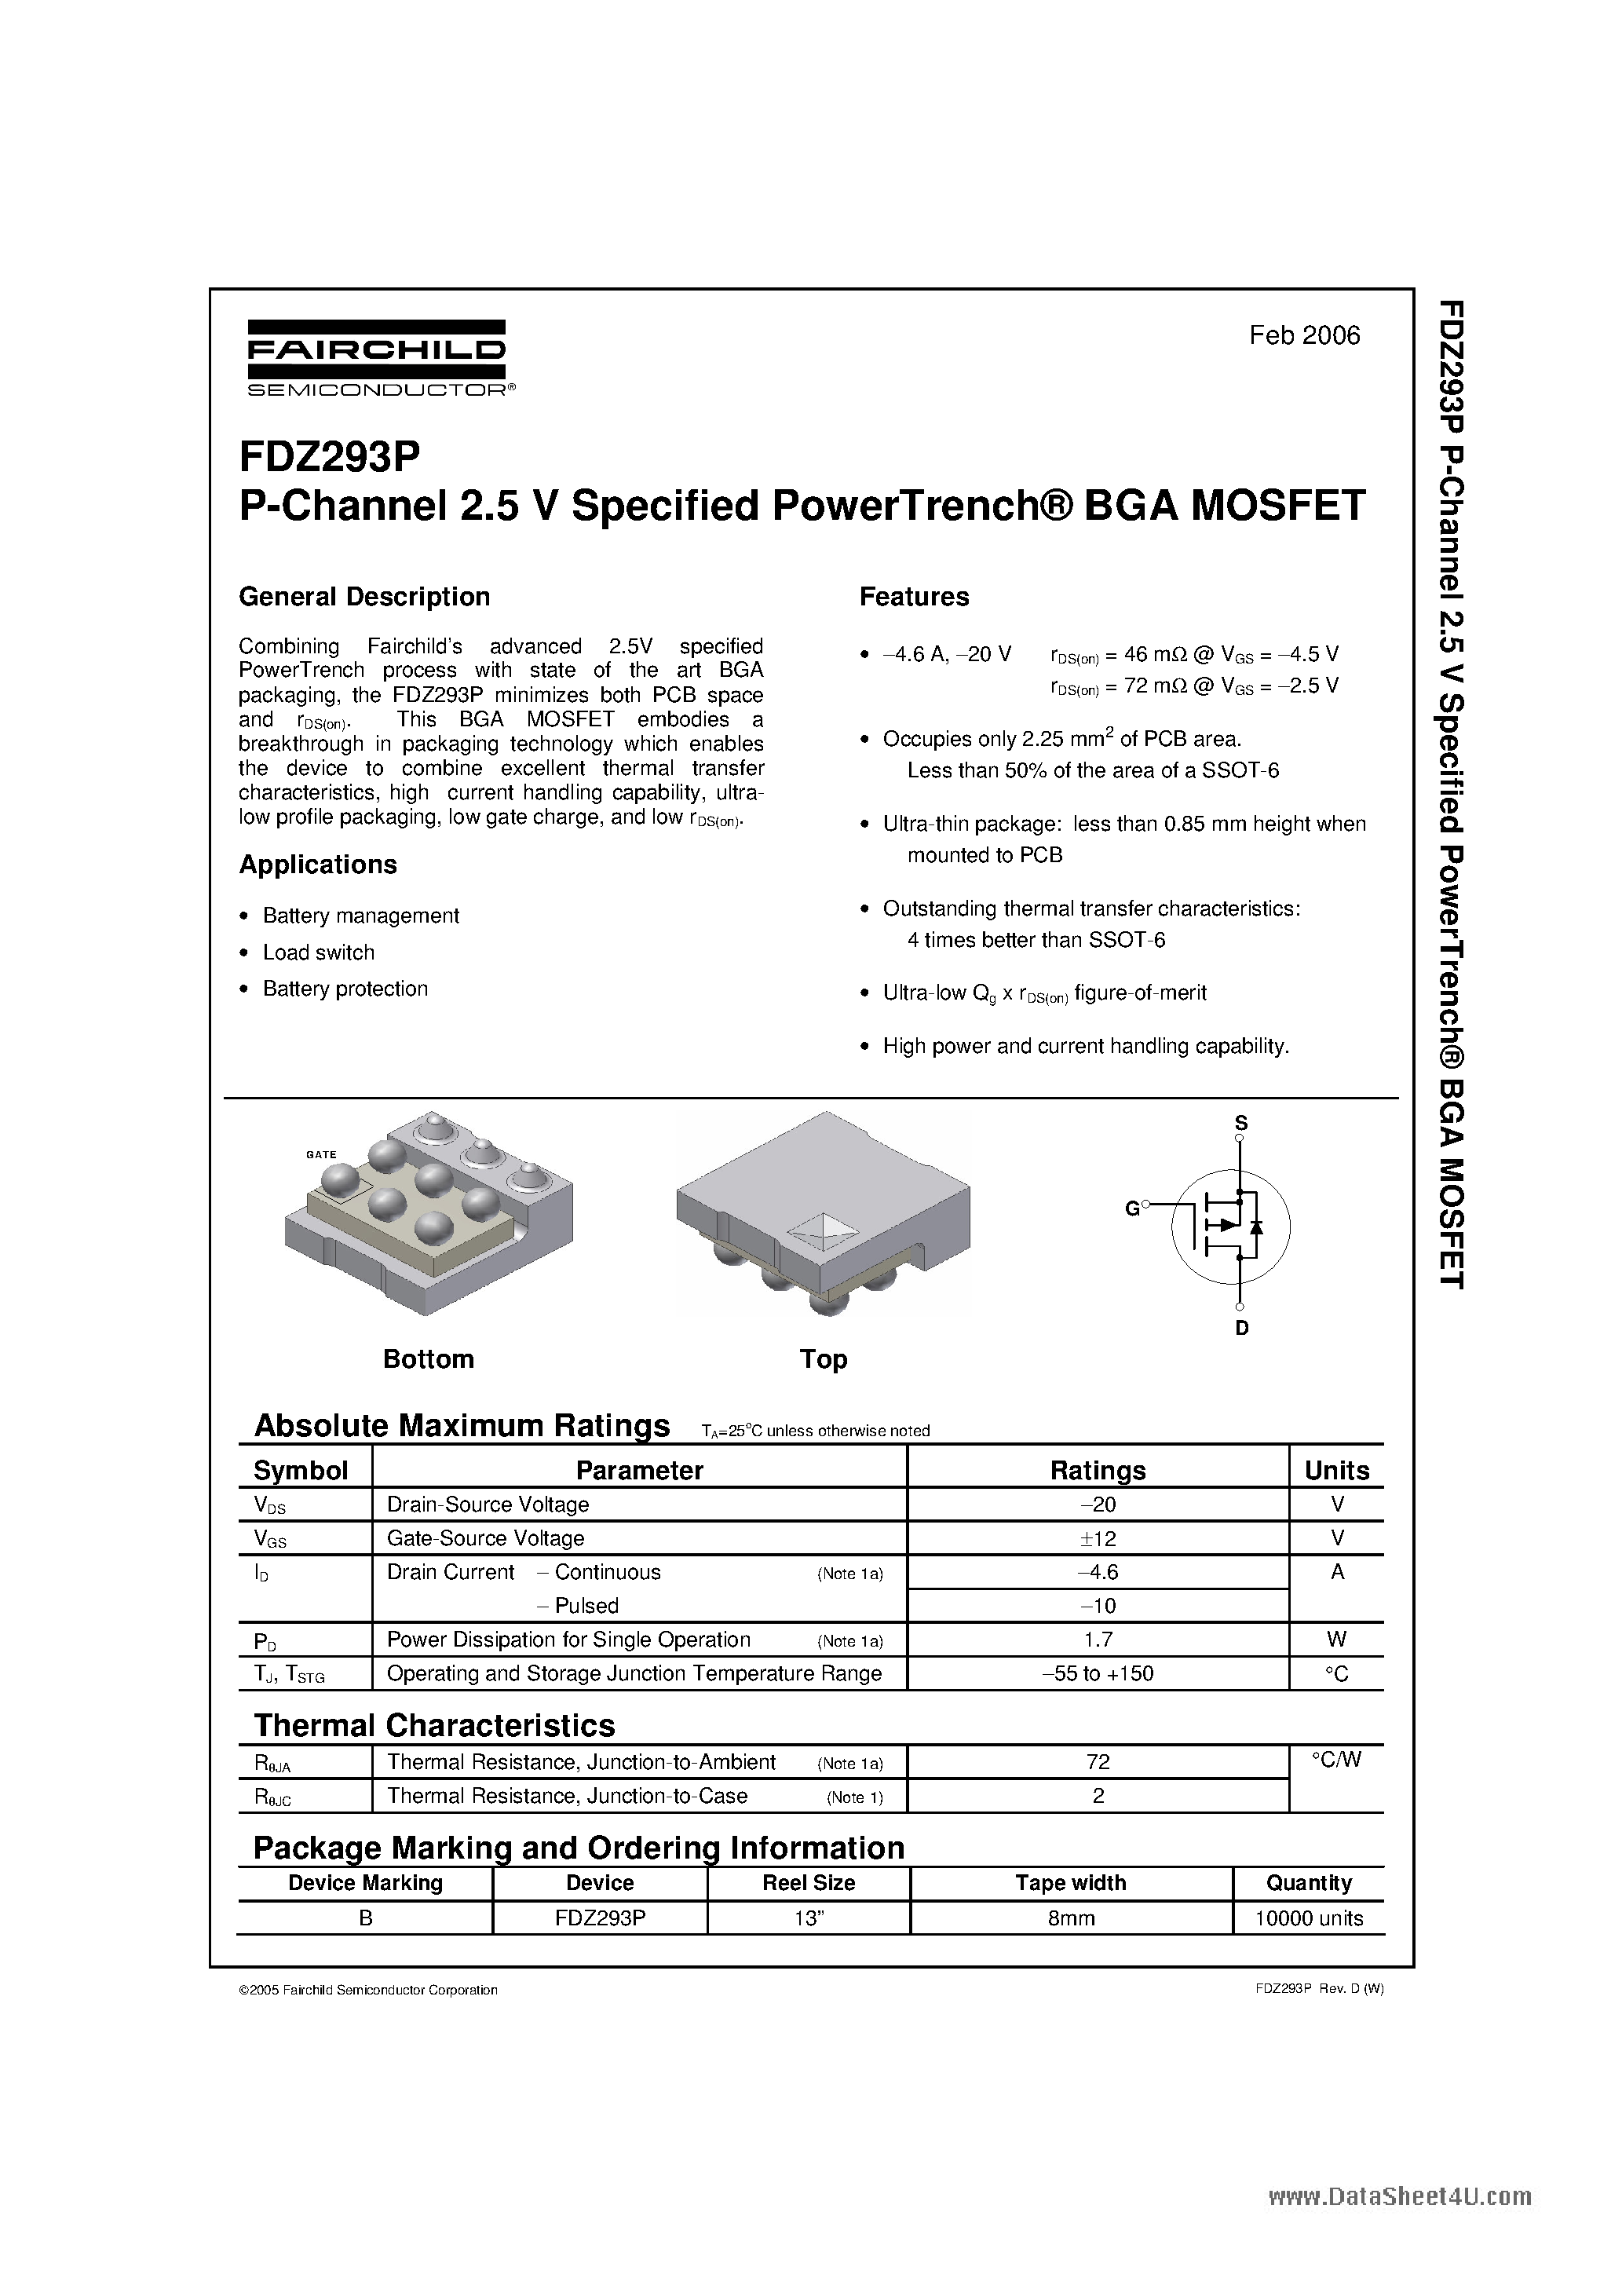 Даташит FDZ293P - P-Channel 2.5 V Specified PowerTrench BGA MOSFET страница 1